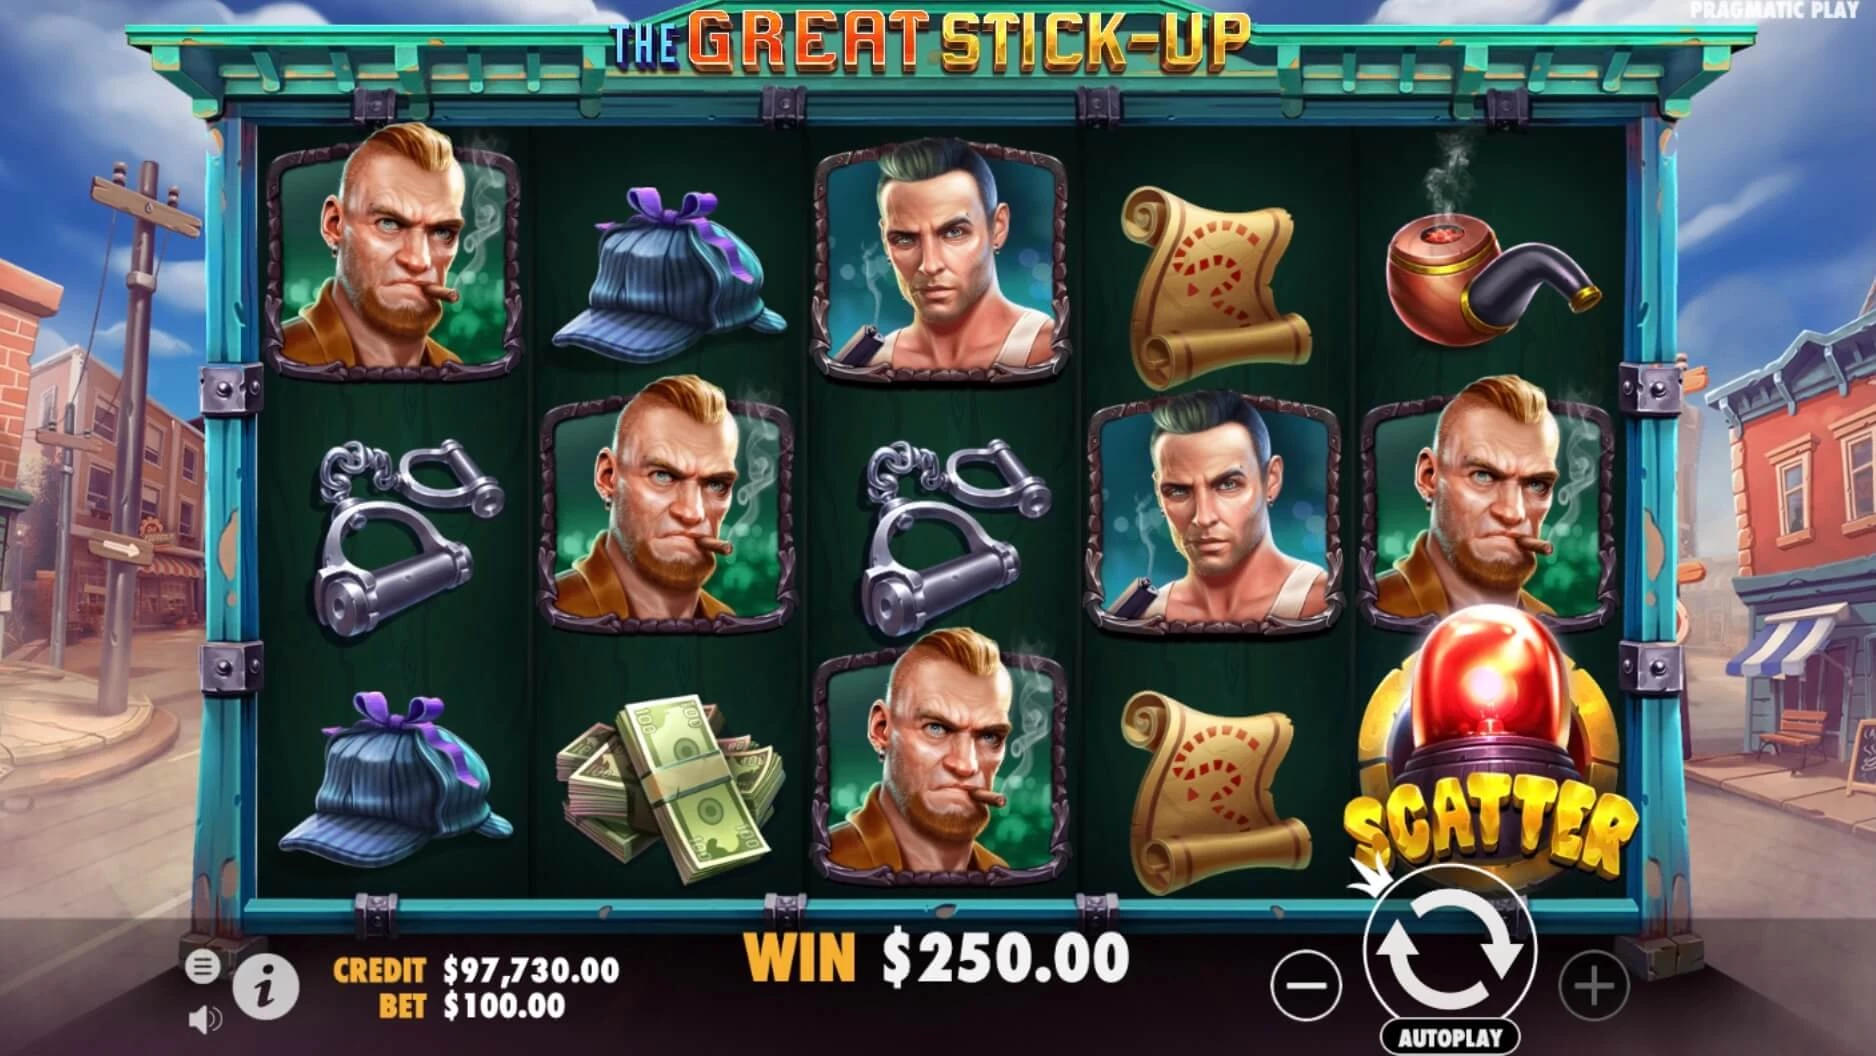 The Great Stick-up win slot